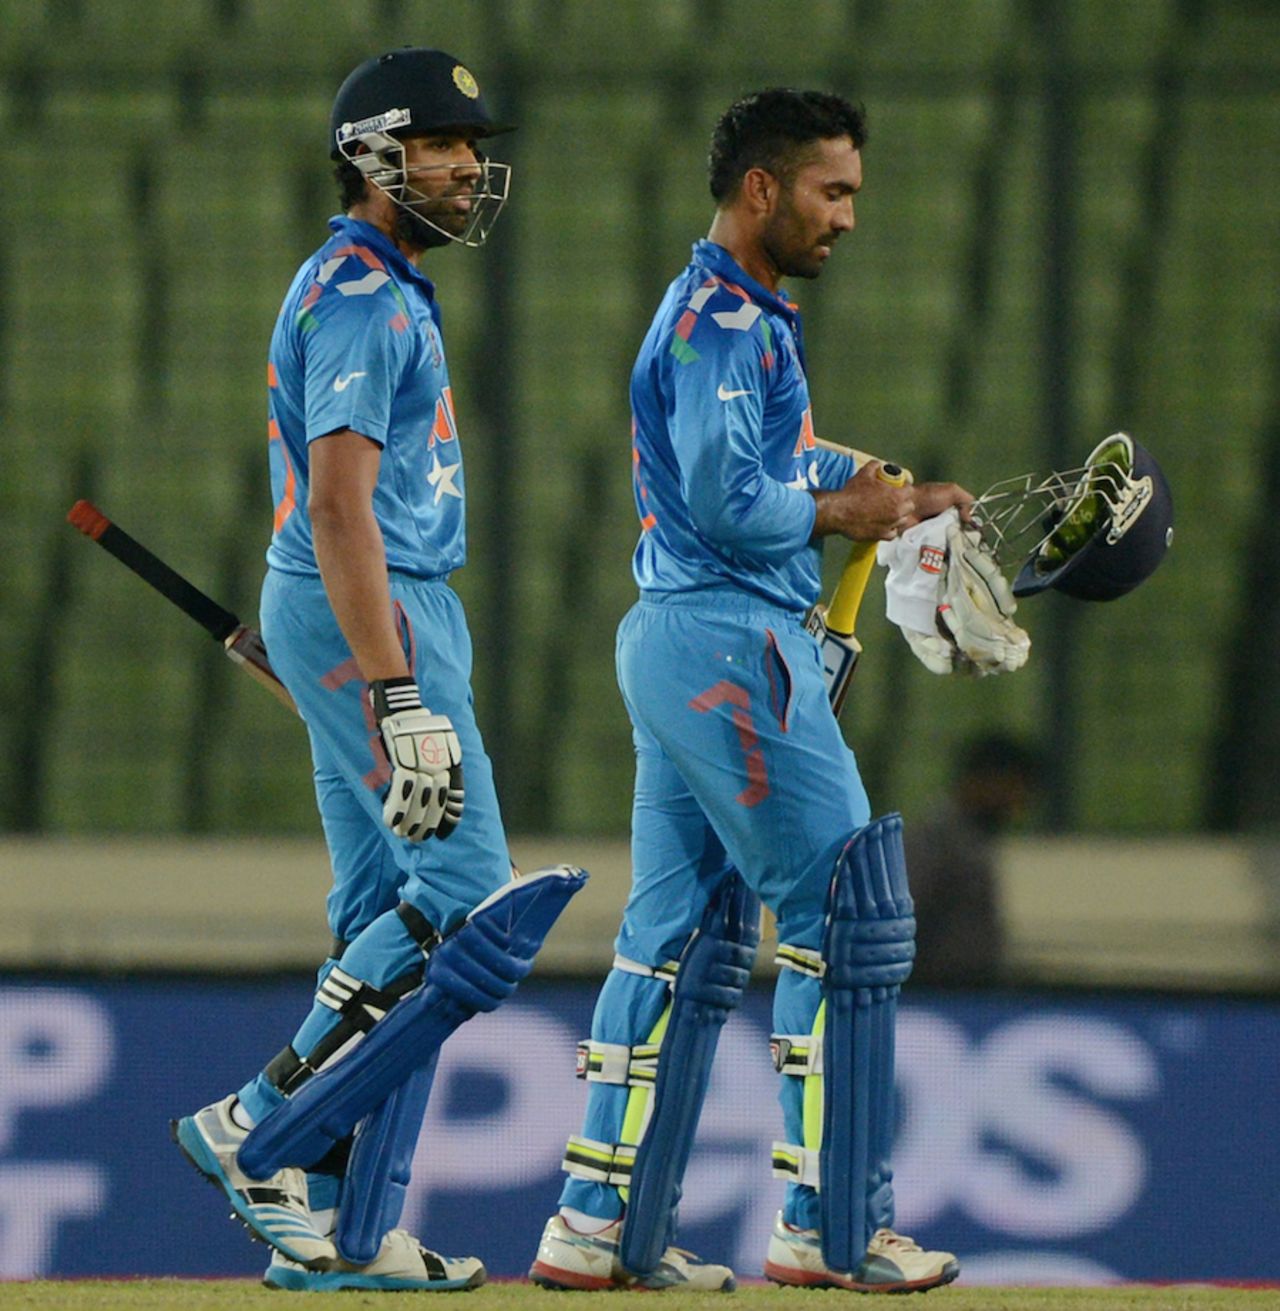 Dinesh Karthik and Rohit Sharma were unbeaten at the end, Afghanistan v India, Asia Cup, Mirpur, March 5, 2014